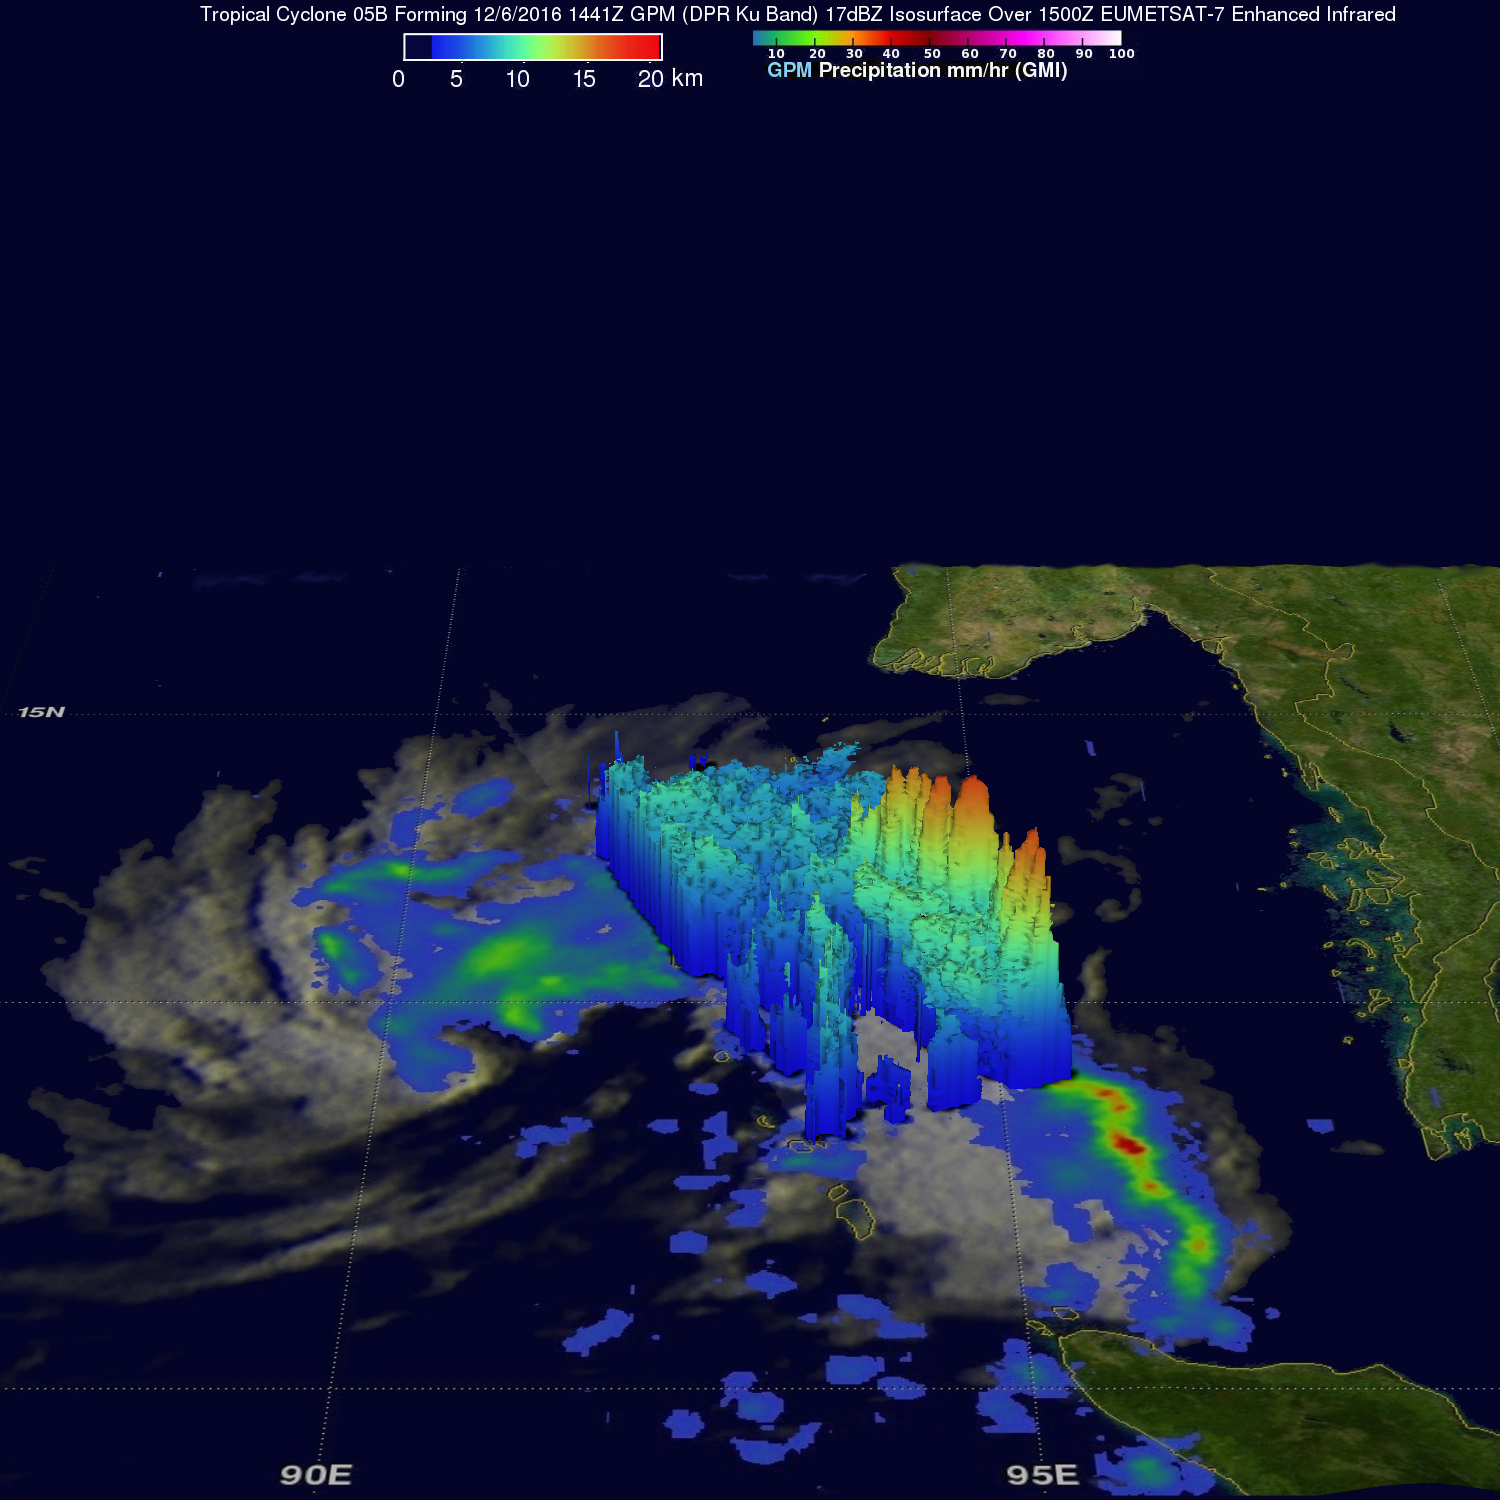 Forming Tropical Cyclone Examined By GPM 